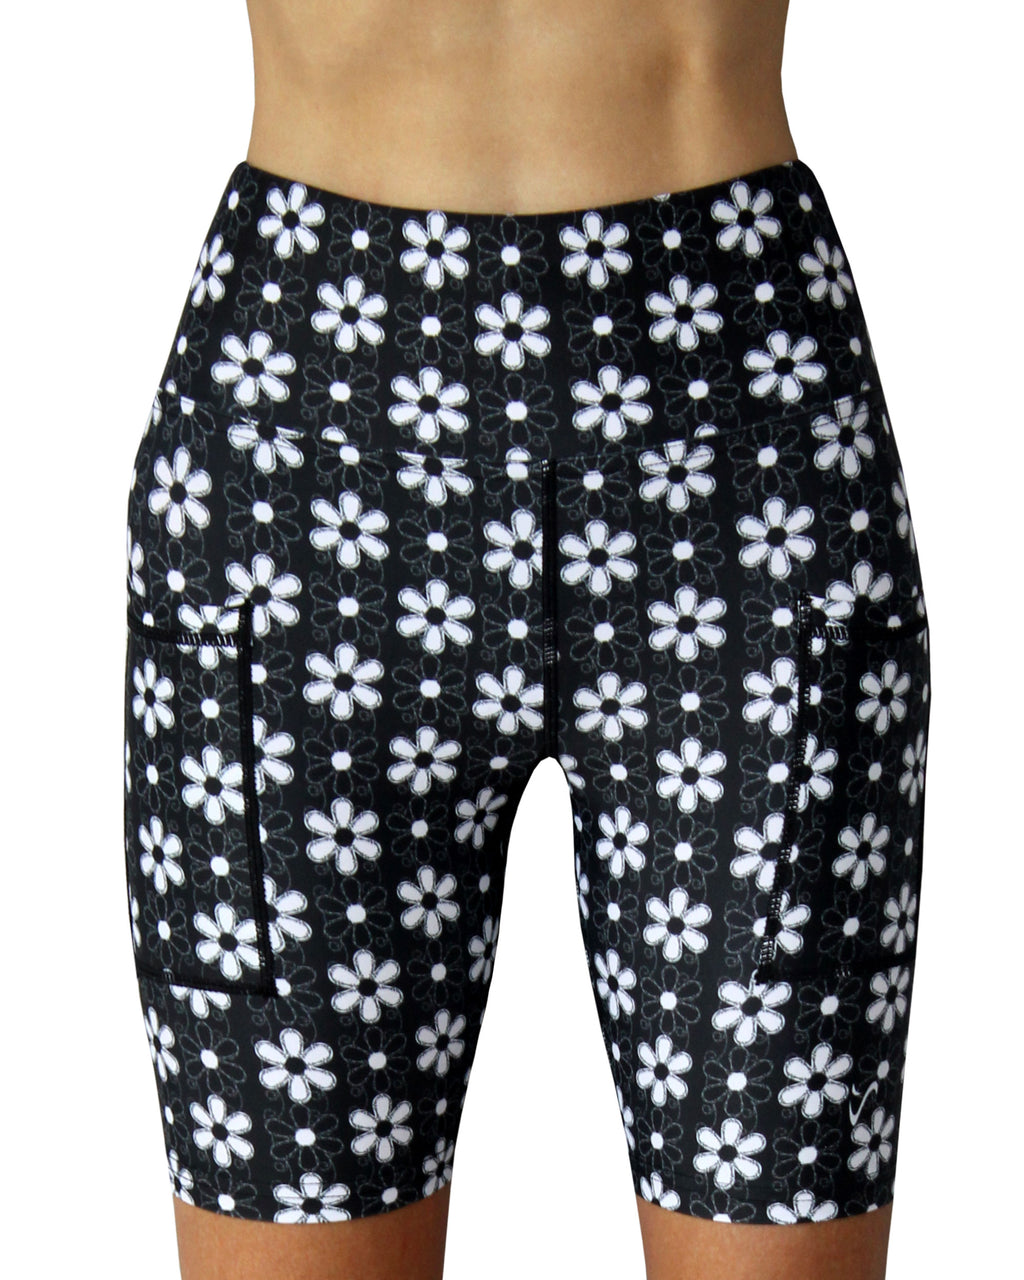 Black and white, funky flower shorts for running and gym. Made in Cape Town, South Africa. Shop online. 